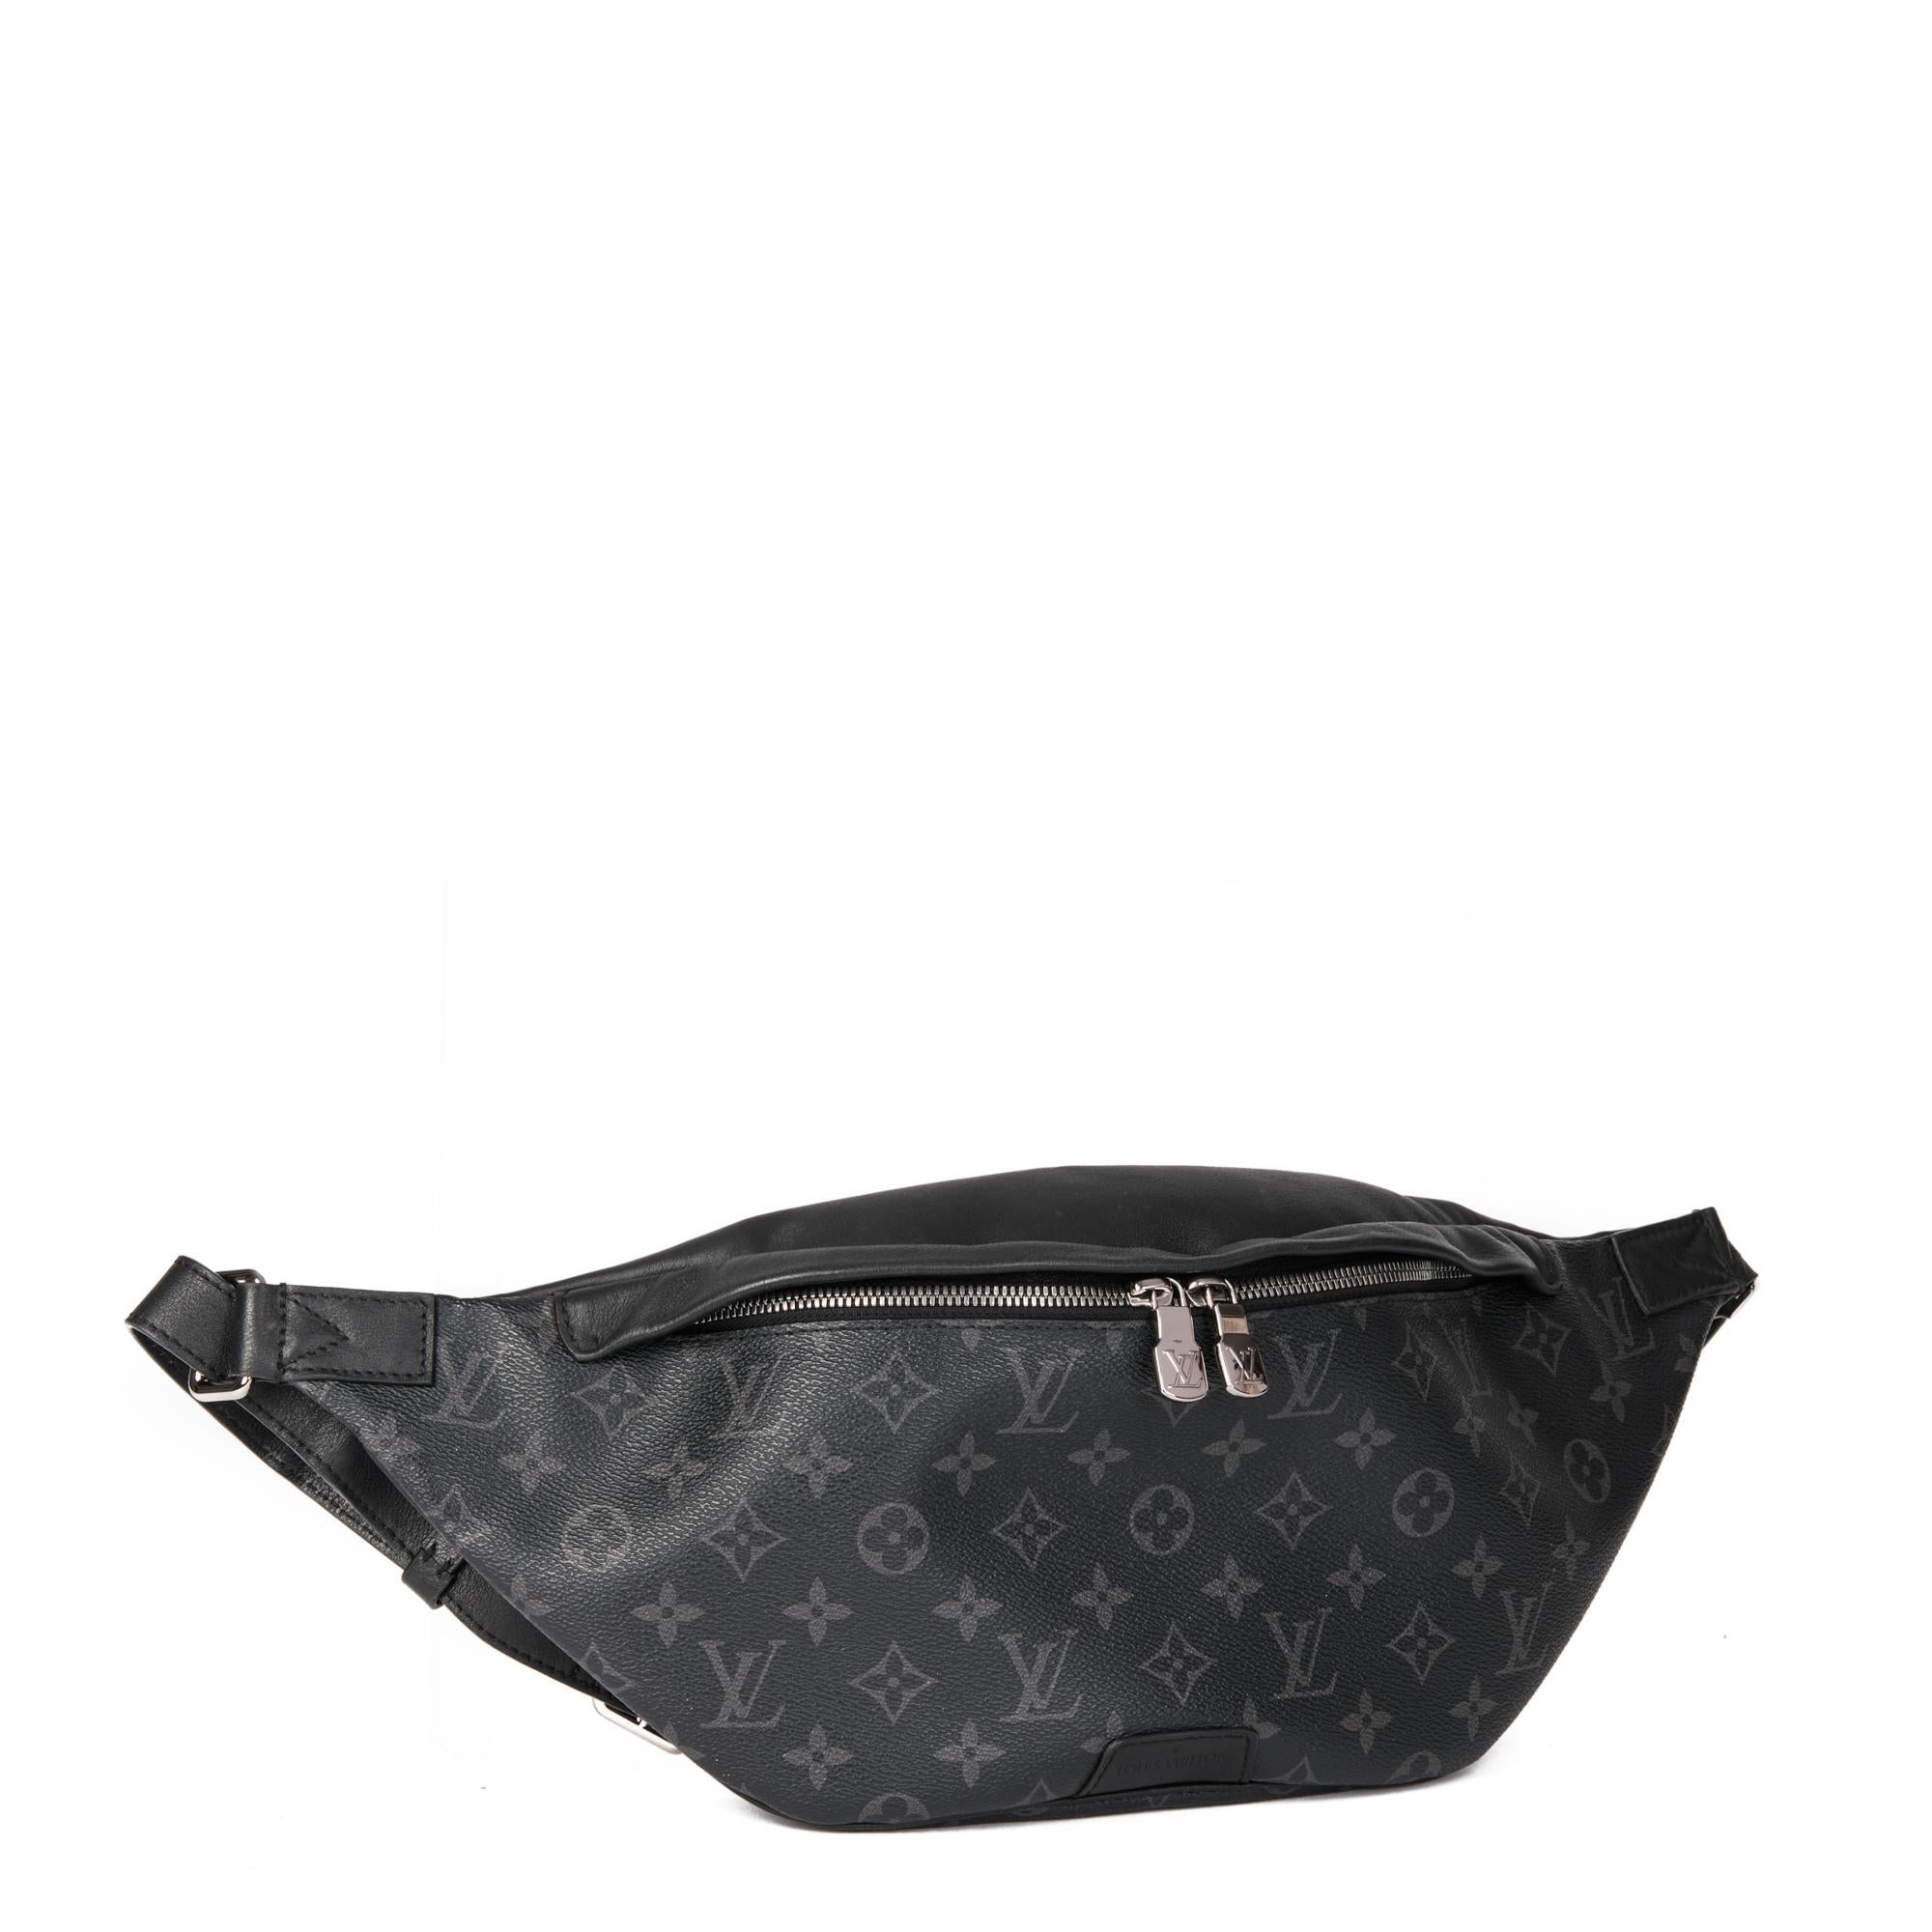 LOUIS VUITTON
Eclipse Monogram Coated Canvas & Calfskin Leather Discovery PM Bumbag

Xupes Reference: HB4445
Serial Number: SP1199
Age (Circa): 2019
Authenticity Details: Date Stamp (Made in France)
Gender: Ladies
Type: Belt Bag, Crossbody

Colour: